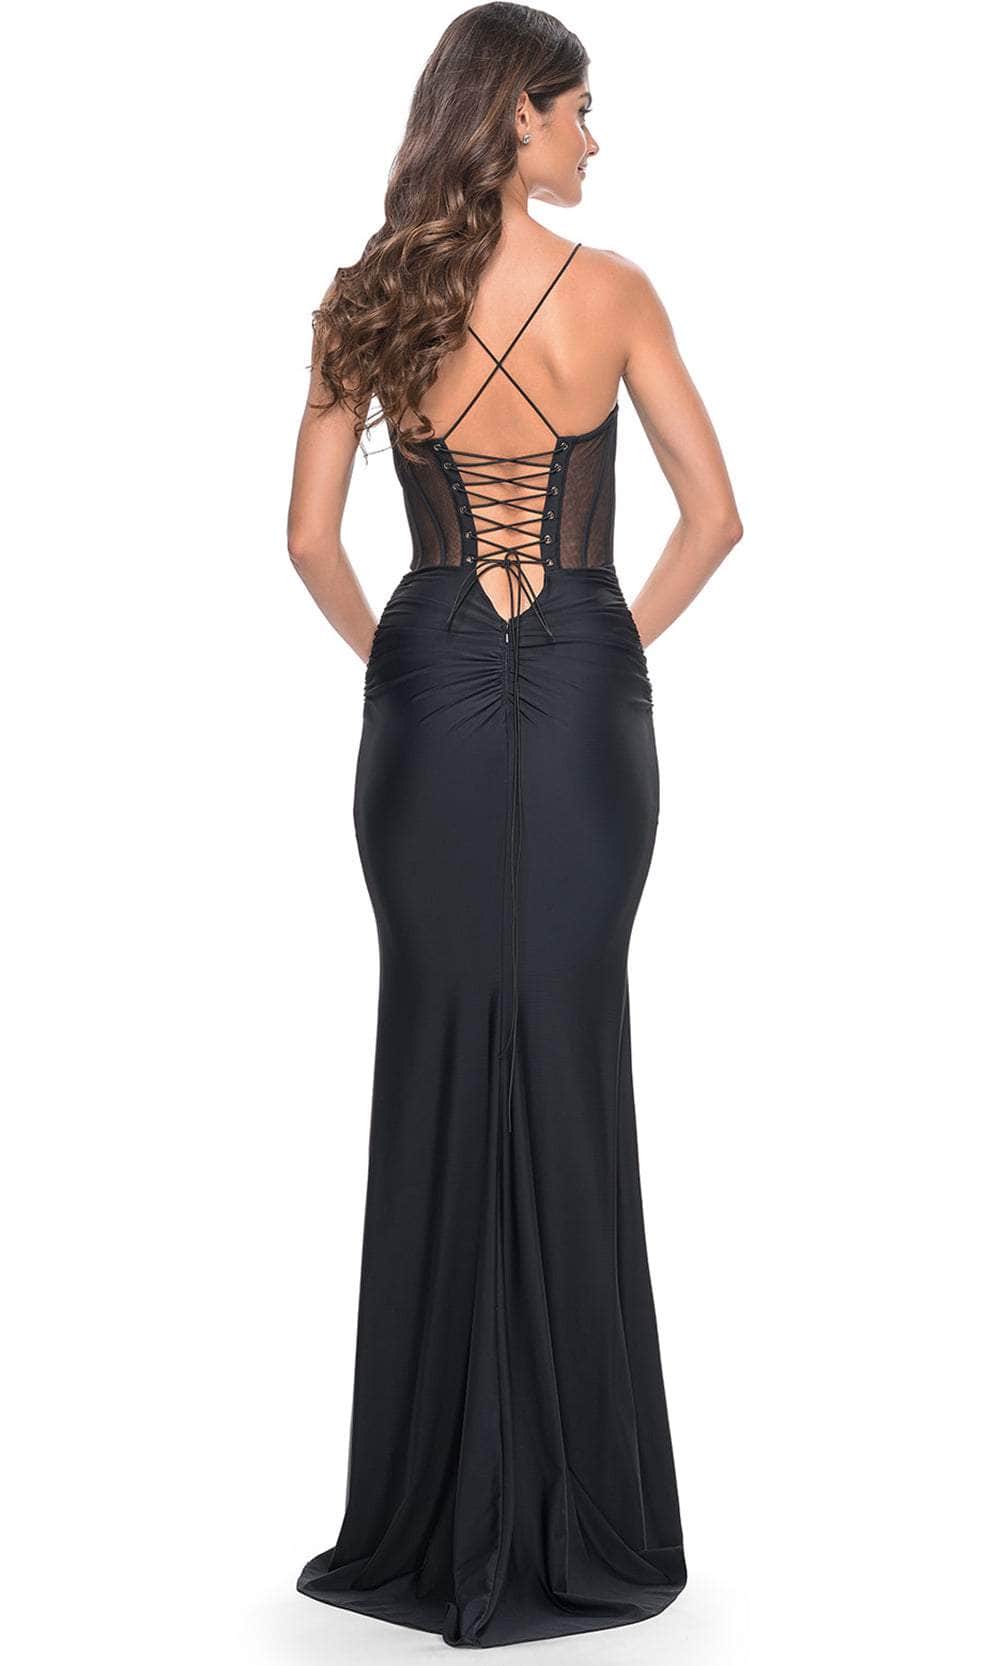 La Femme 32258 - Spaghetti Strap Fitted Prom Gown Evening Dresses